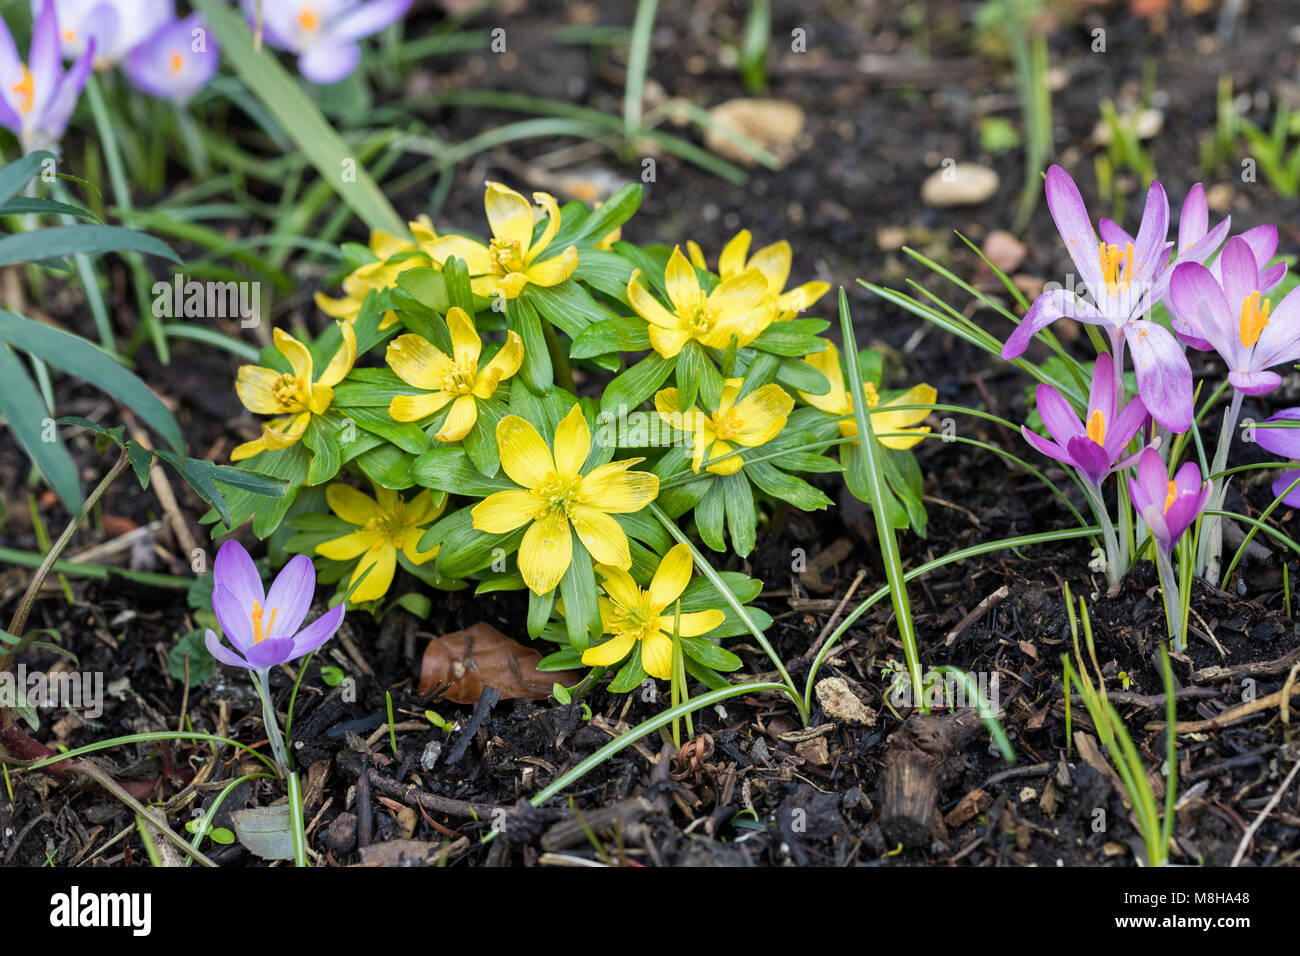 Close up of Winter aconite flowering in February among crocuses in an English garden, UK Stock Photo